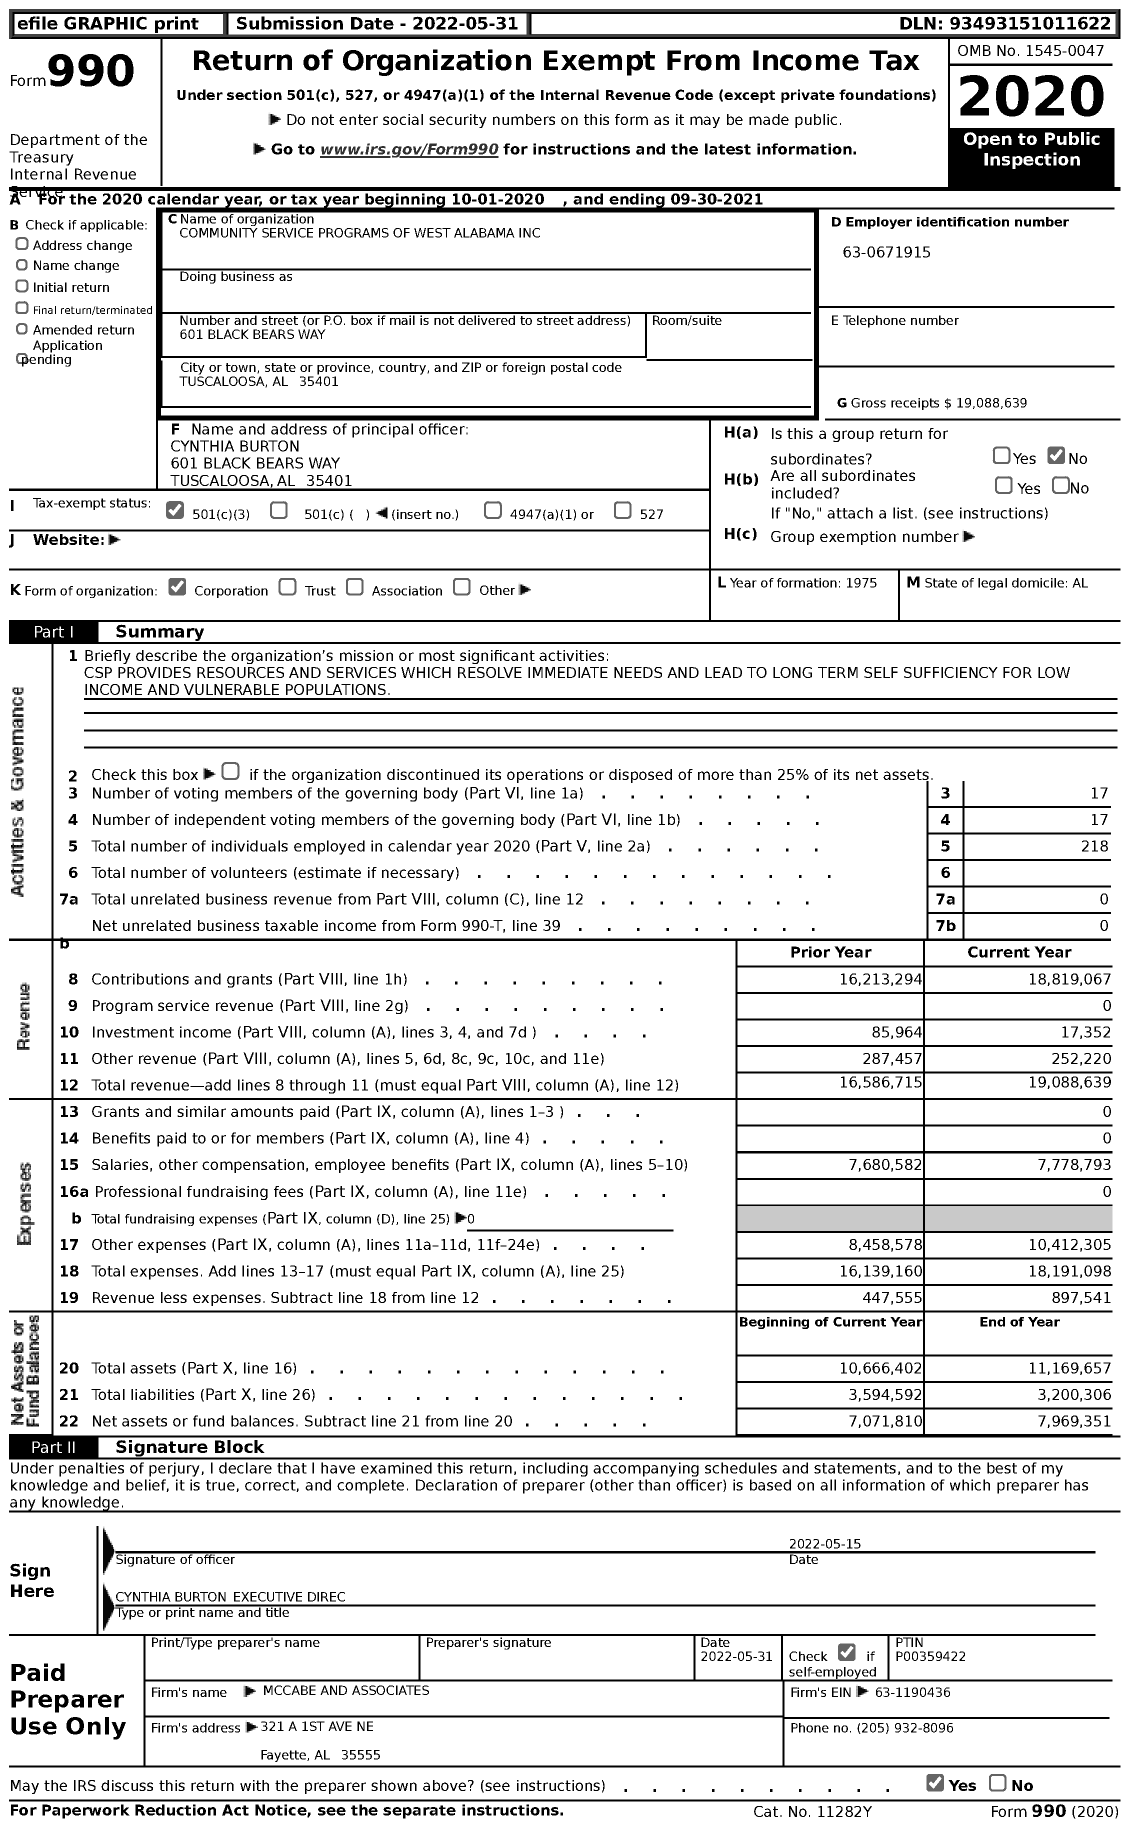 Image of first page of 2020 Form 990 for Community Service Programs of West Alabama (CSP)